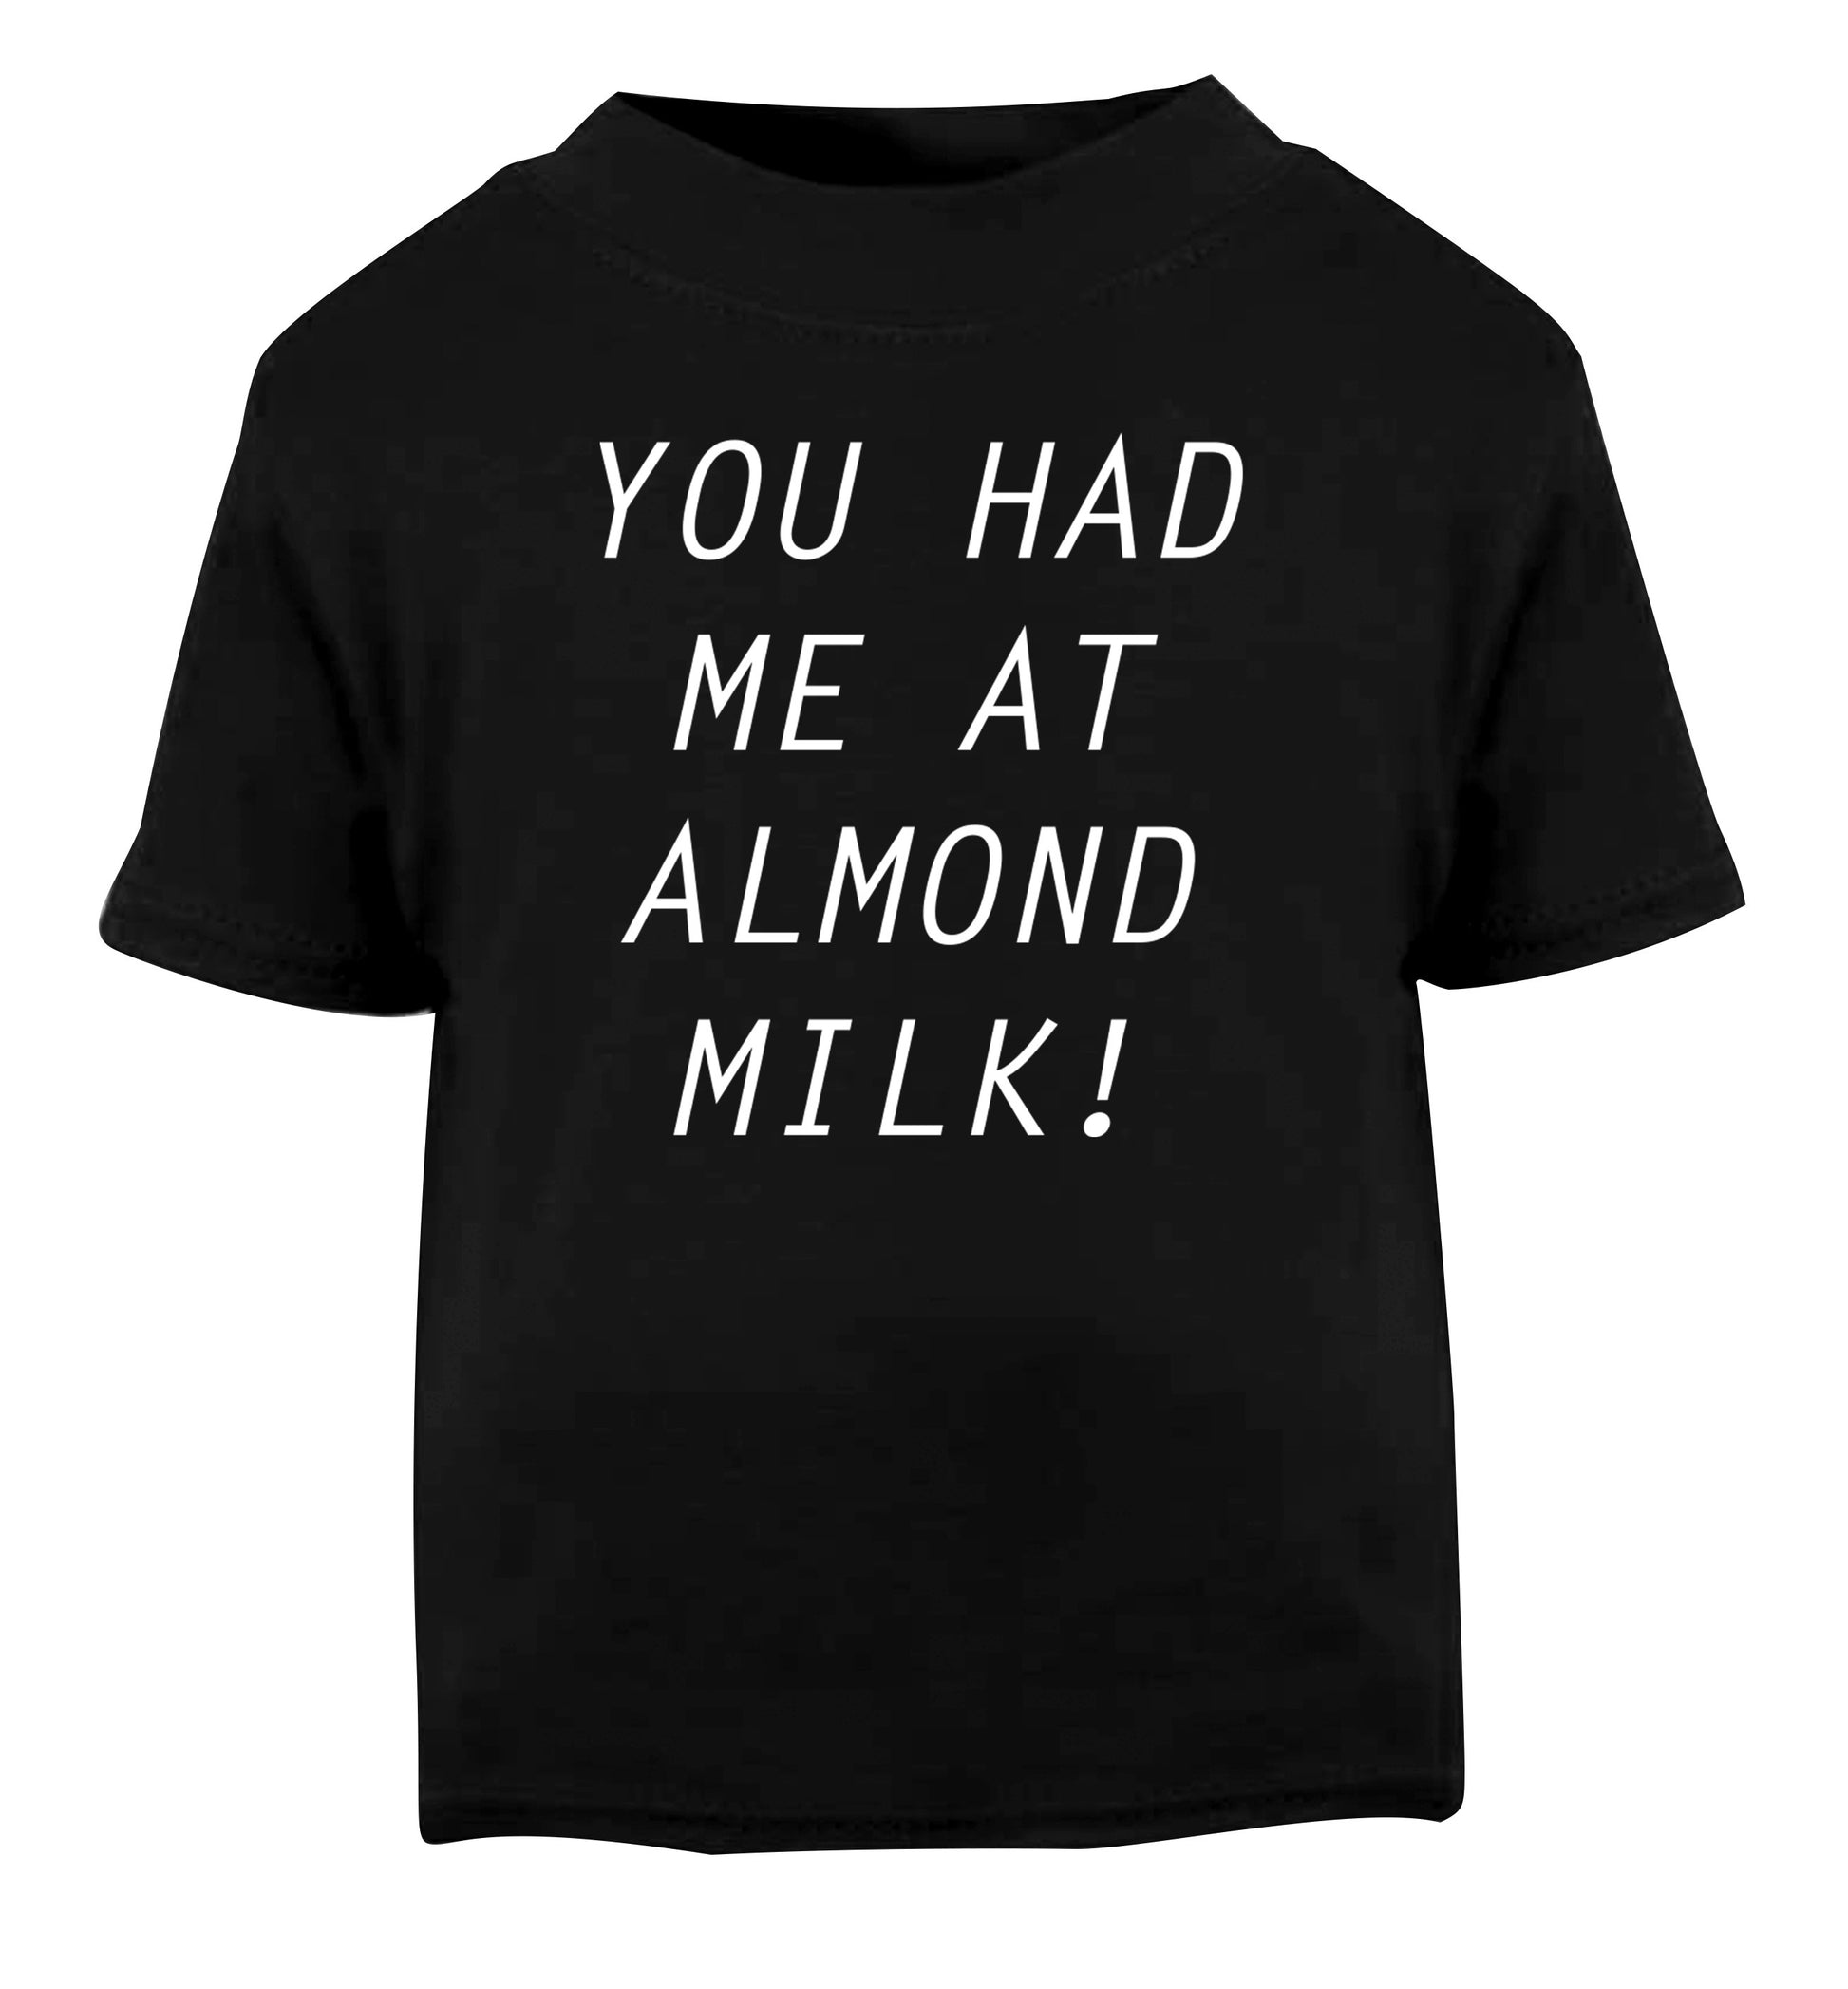 You had me at almond milk Black Baby Toddler Tshirt 2 years